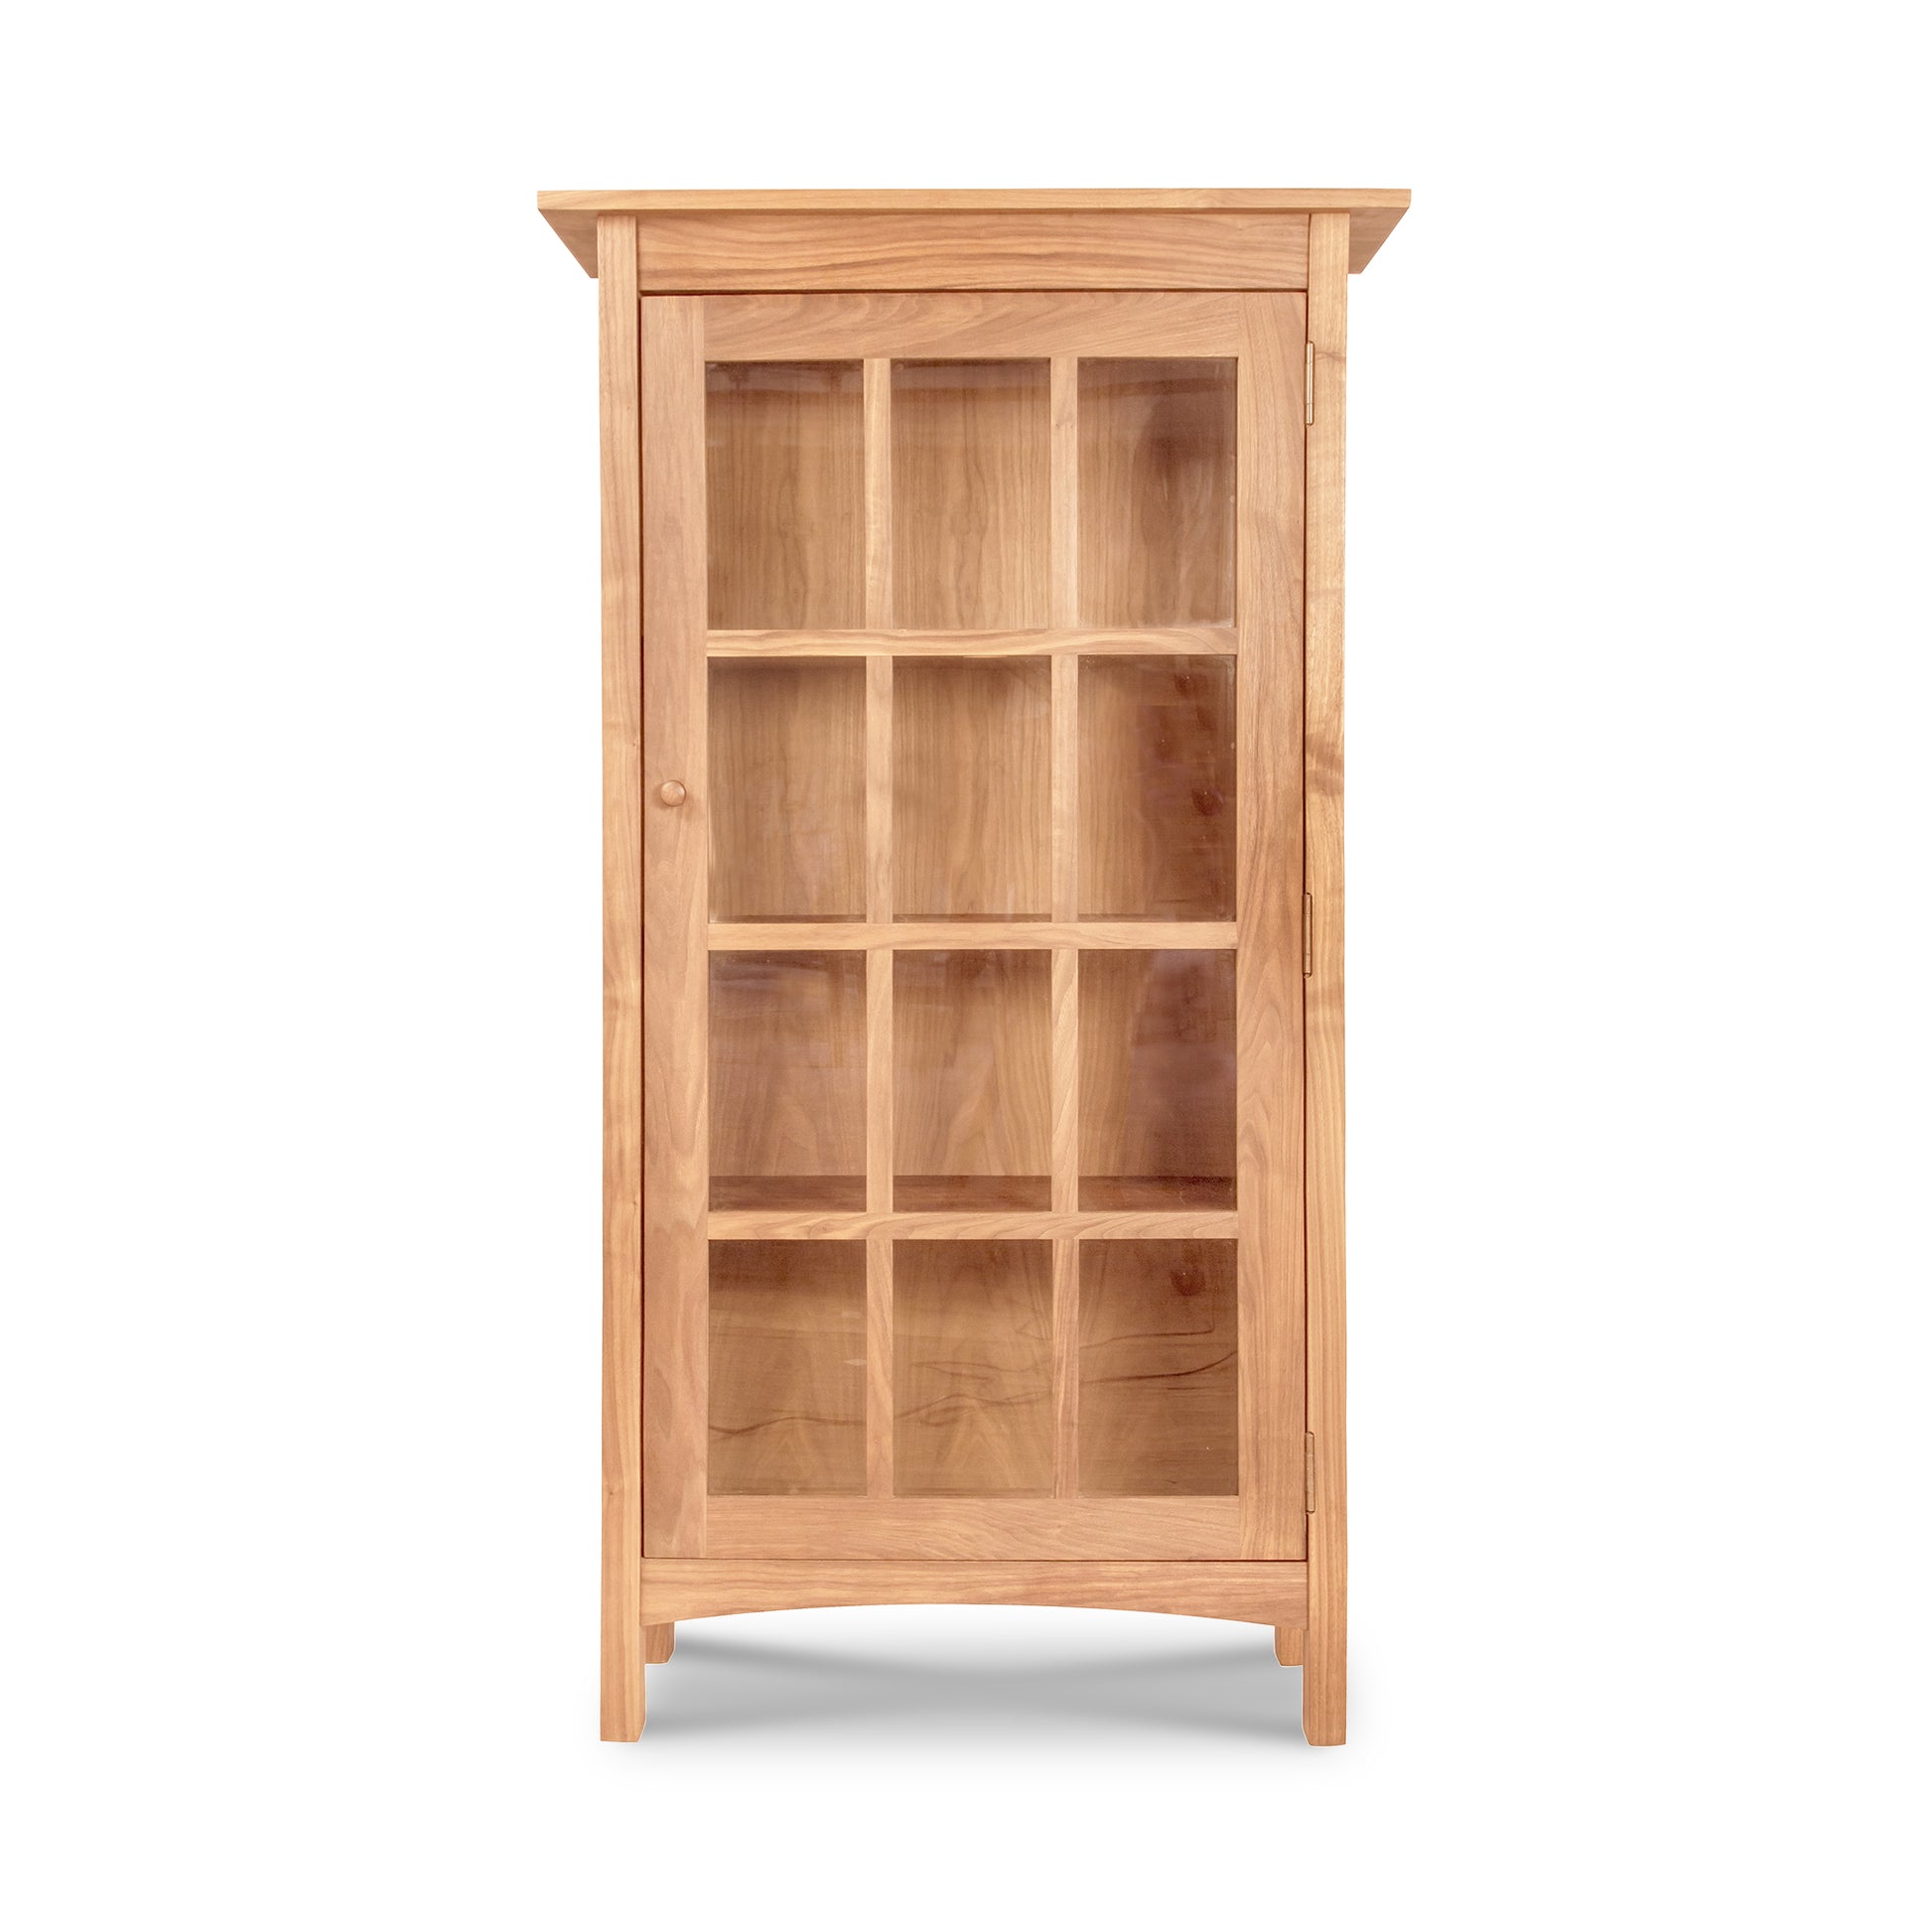 A Burlington Shaker Glass Door Bookcase by Vermont Furniture Designs, combining Shaker style and elegance, showcasing its wooden beauty against a white background.